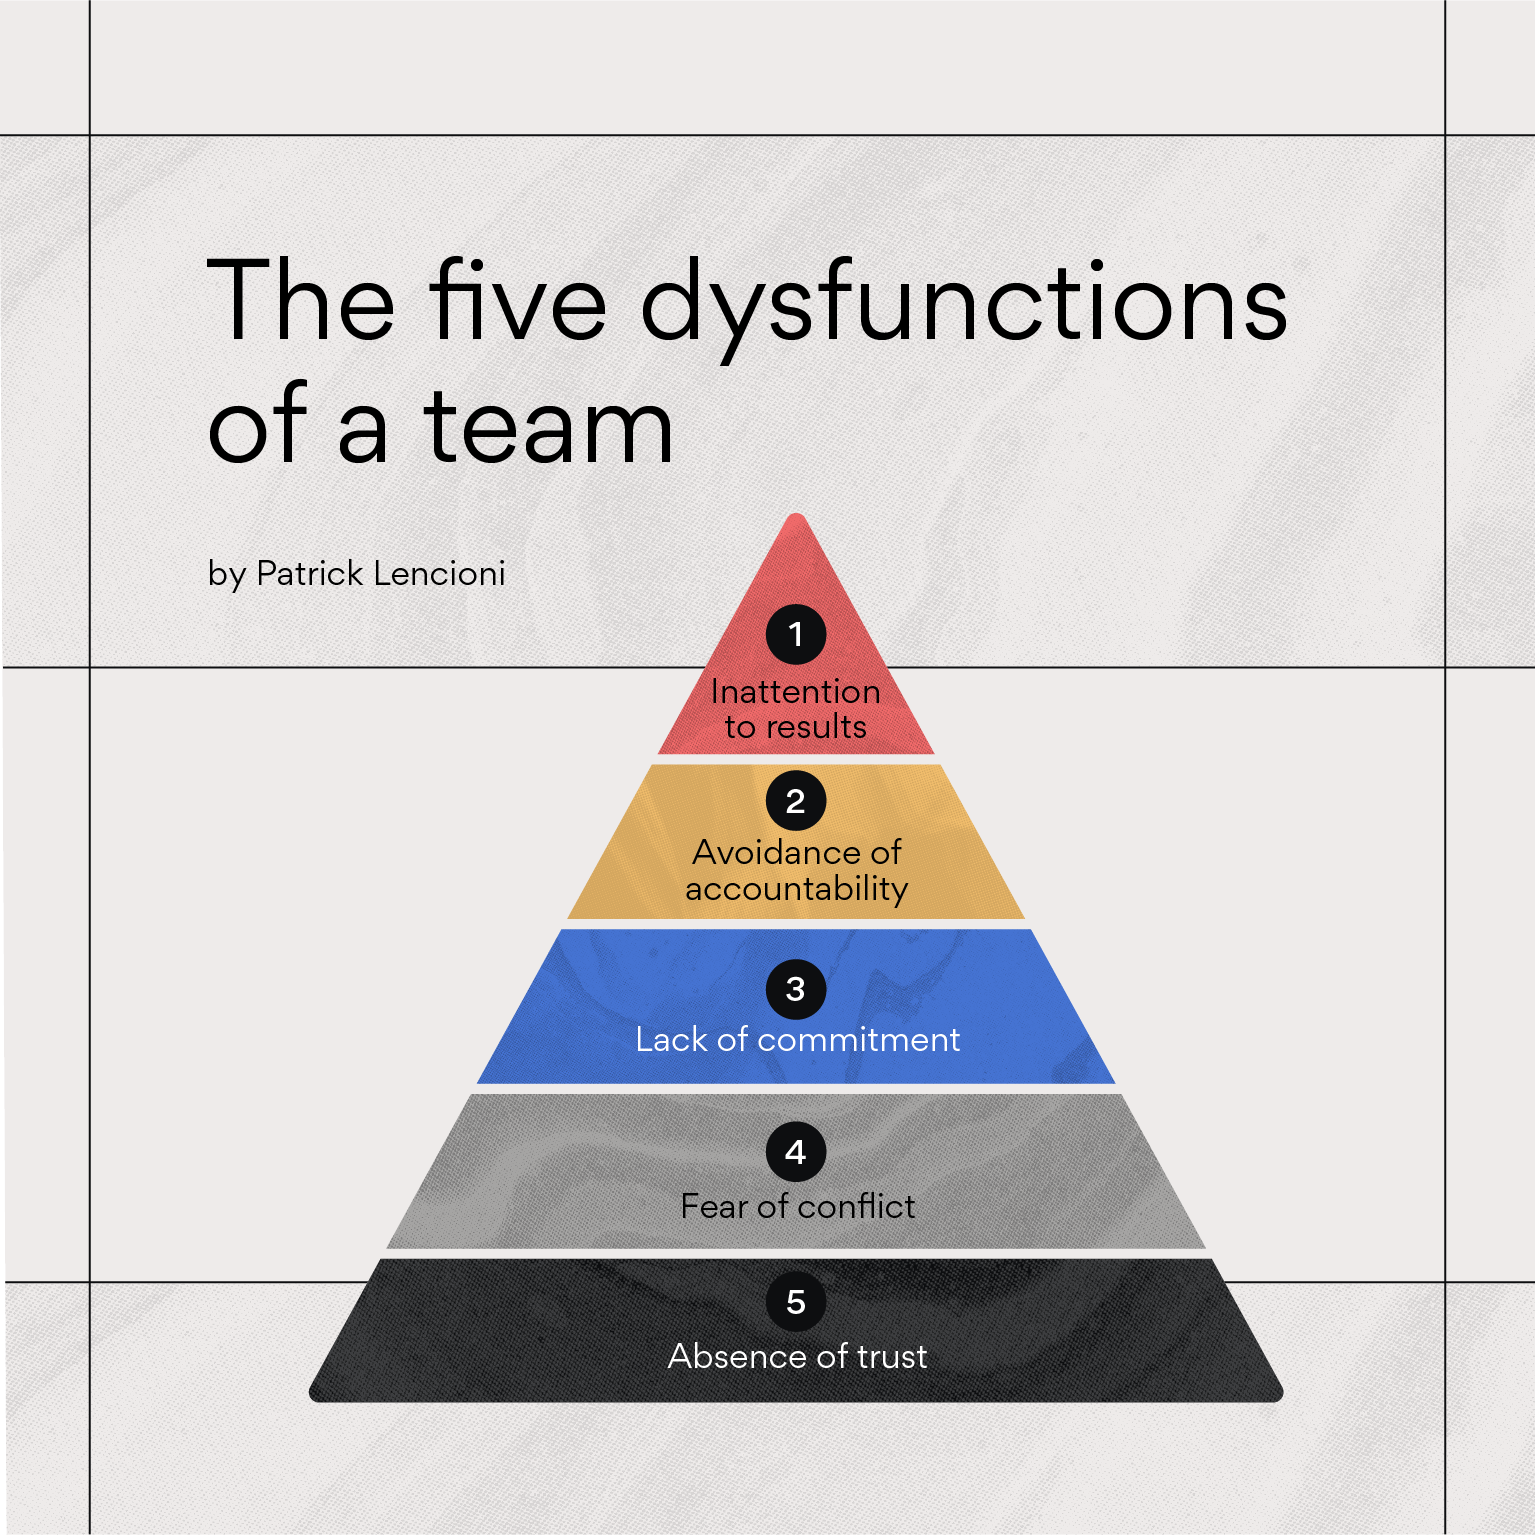 Chart outlining the five dysfunctions of a team: absence of trust, fear of conflict, lack of commitment, avoidance of accountability, and inattention to results.